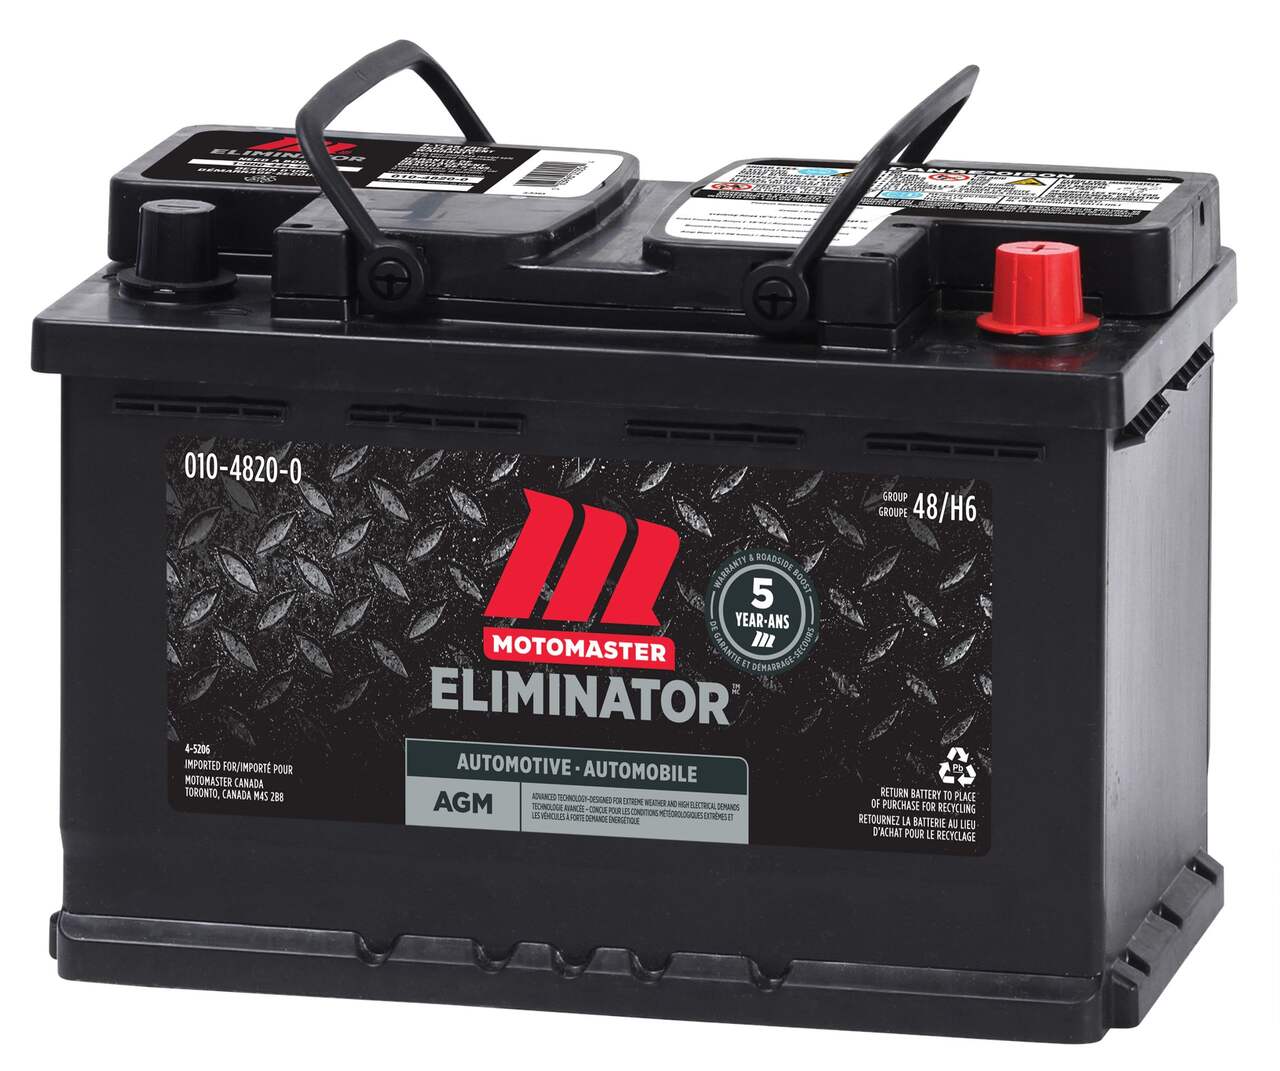 https://media-www.canadiantire.ca/product/automotive/light-auto-parts/auto-batteries/0104820/motomaster-eliminator-agm-group-48-l3-h6-battery-760-cca-c59bfb18-db05-4c61-bb3b-6cf8cba6268c-jpgrendition.jpg?imdensity=1&imwidth=640&impolicy=mZoom